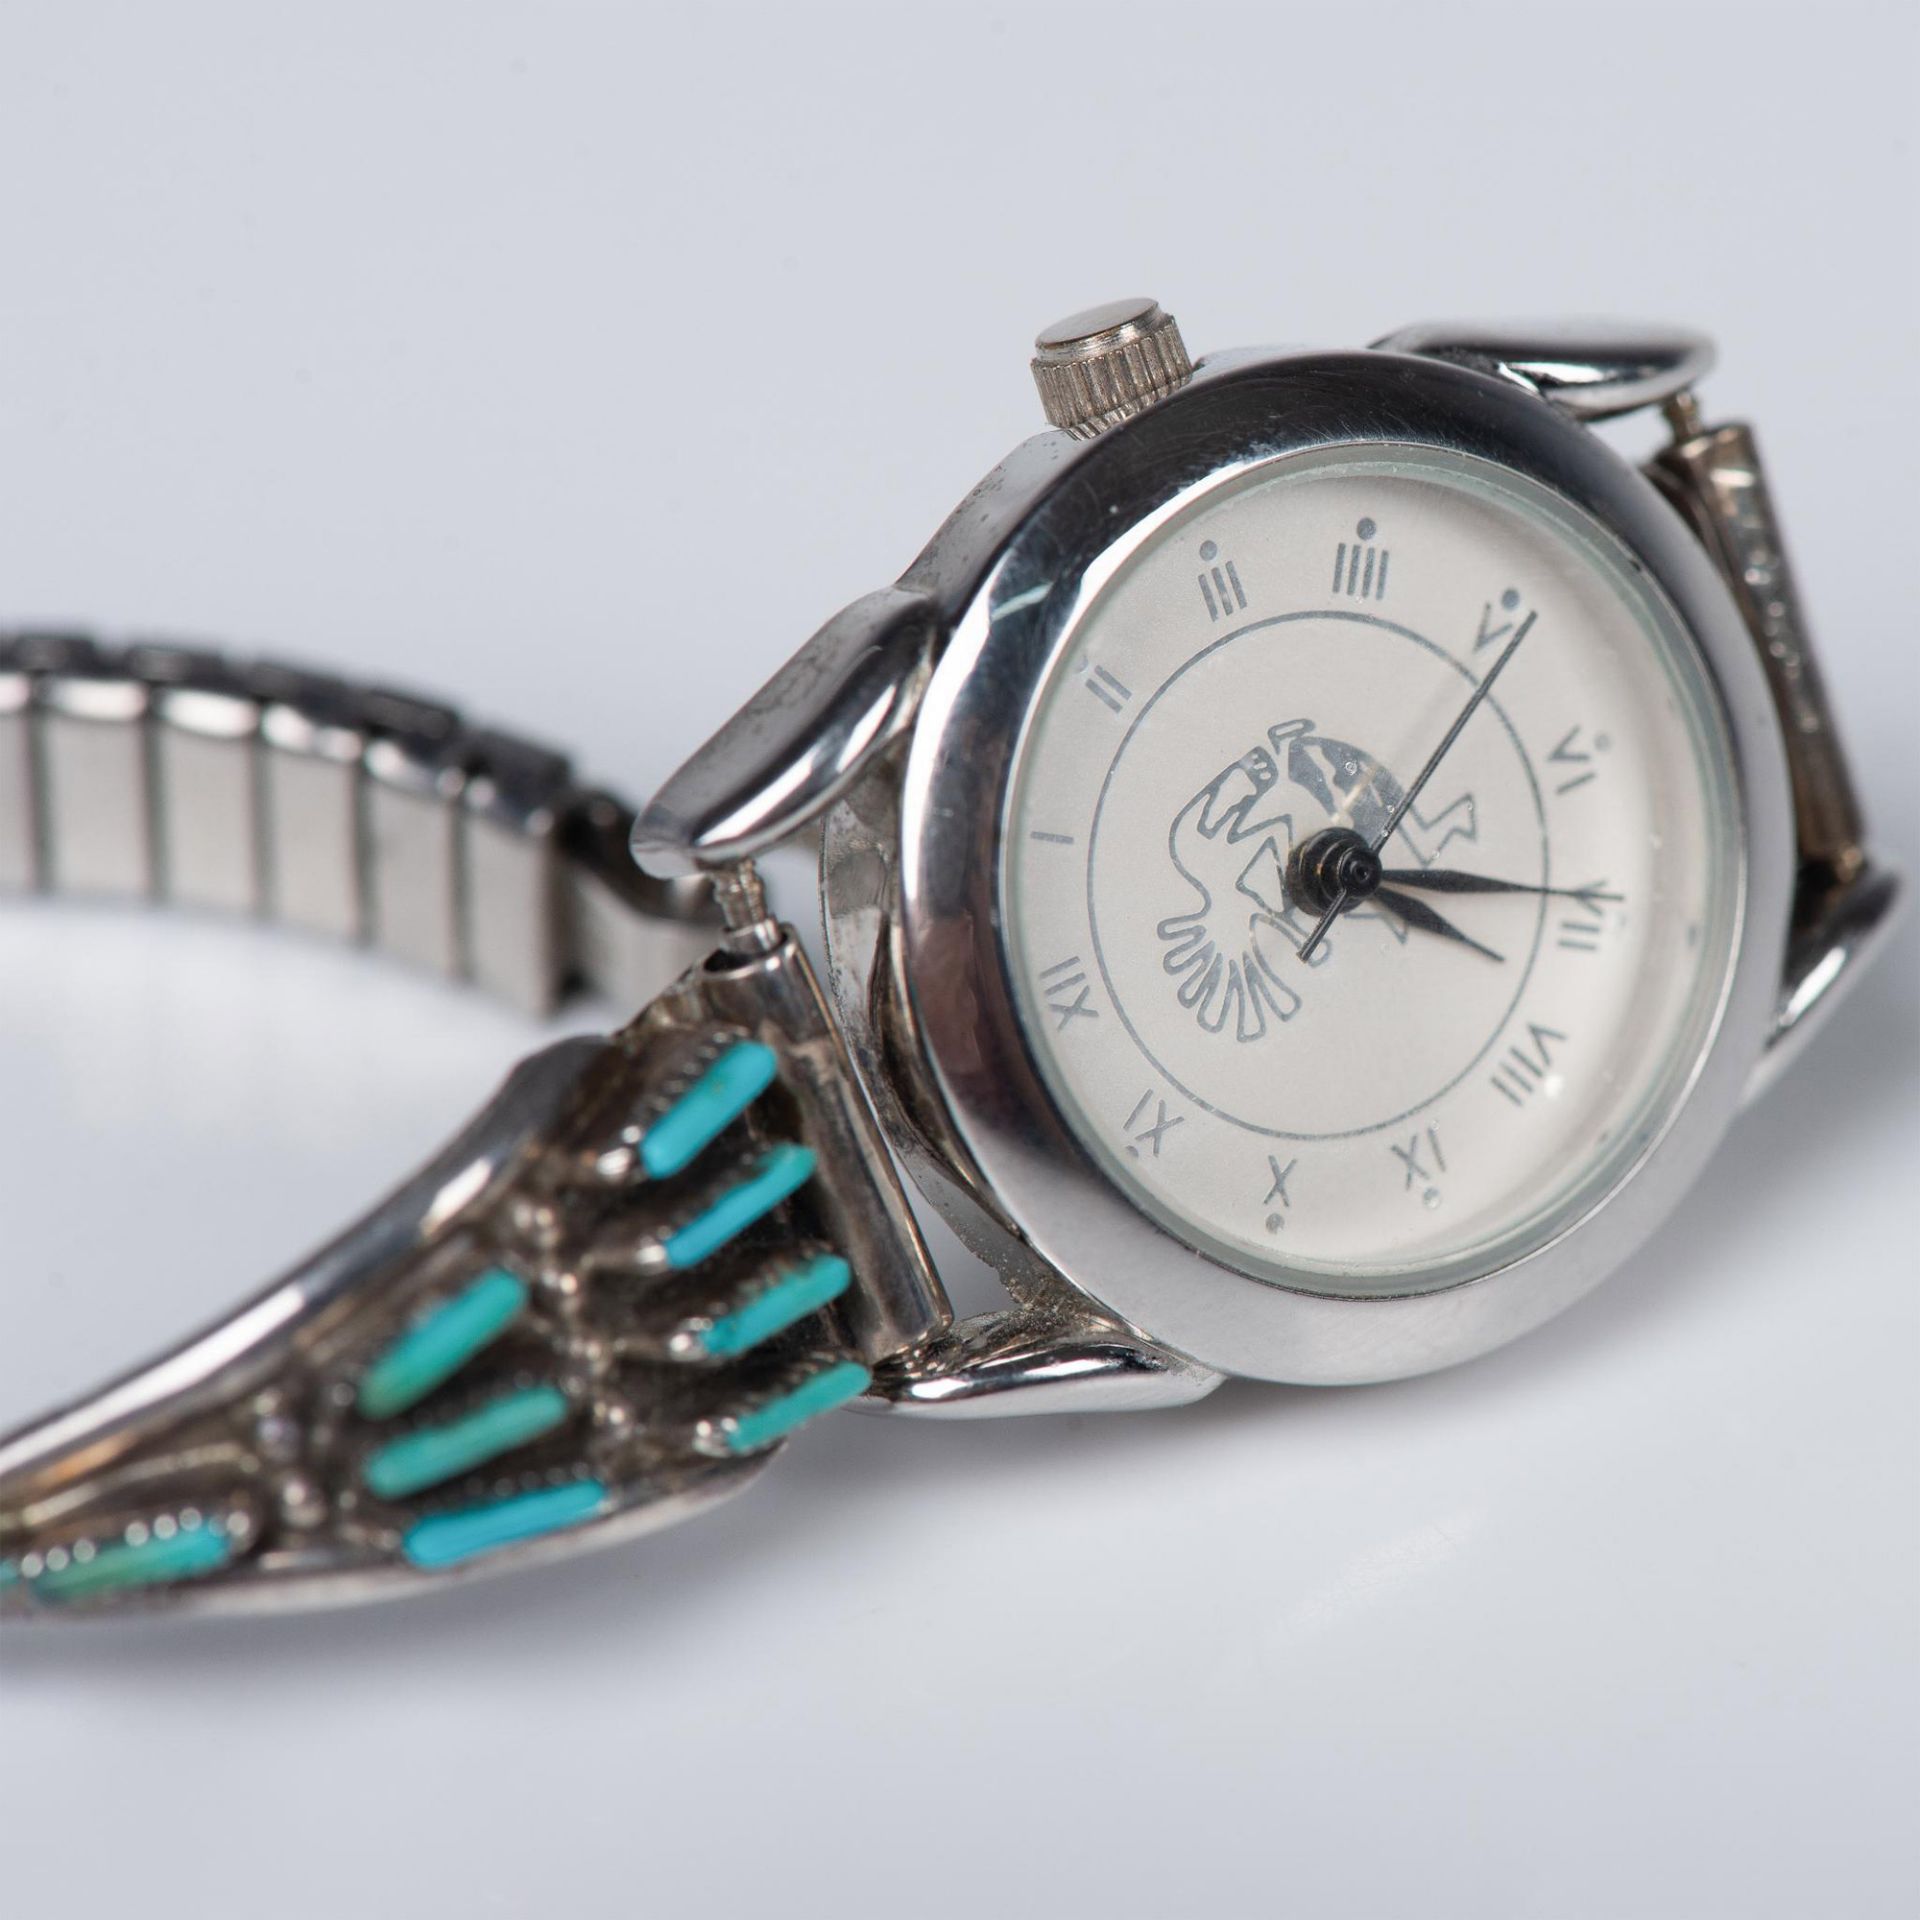 3pc Sterling Silver and Turquoise Earrings and Watch - Image 3 of 4